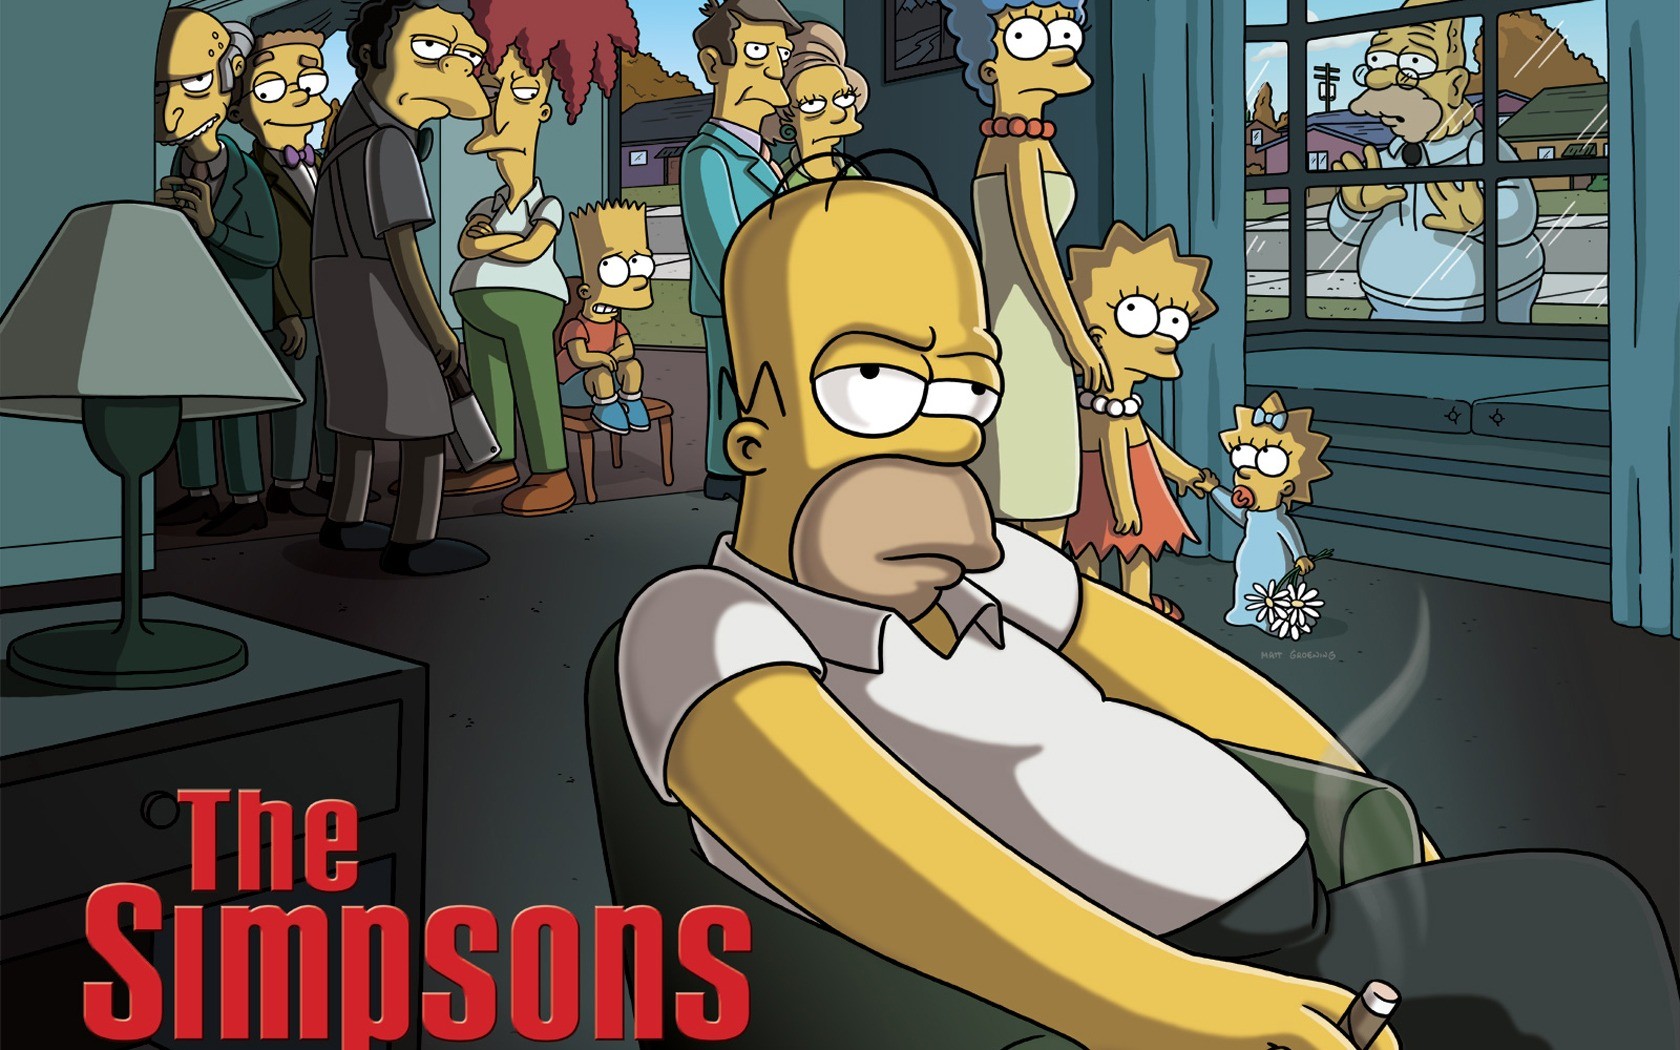 General 1680x1050 The Simpsons Homer Simpson Marge Simpson Bart Simpson Lisa Simpson Maggie Simpson parody cartoon The Sopranos TV series crossover